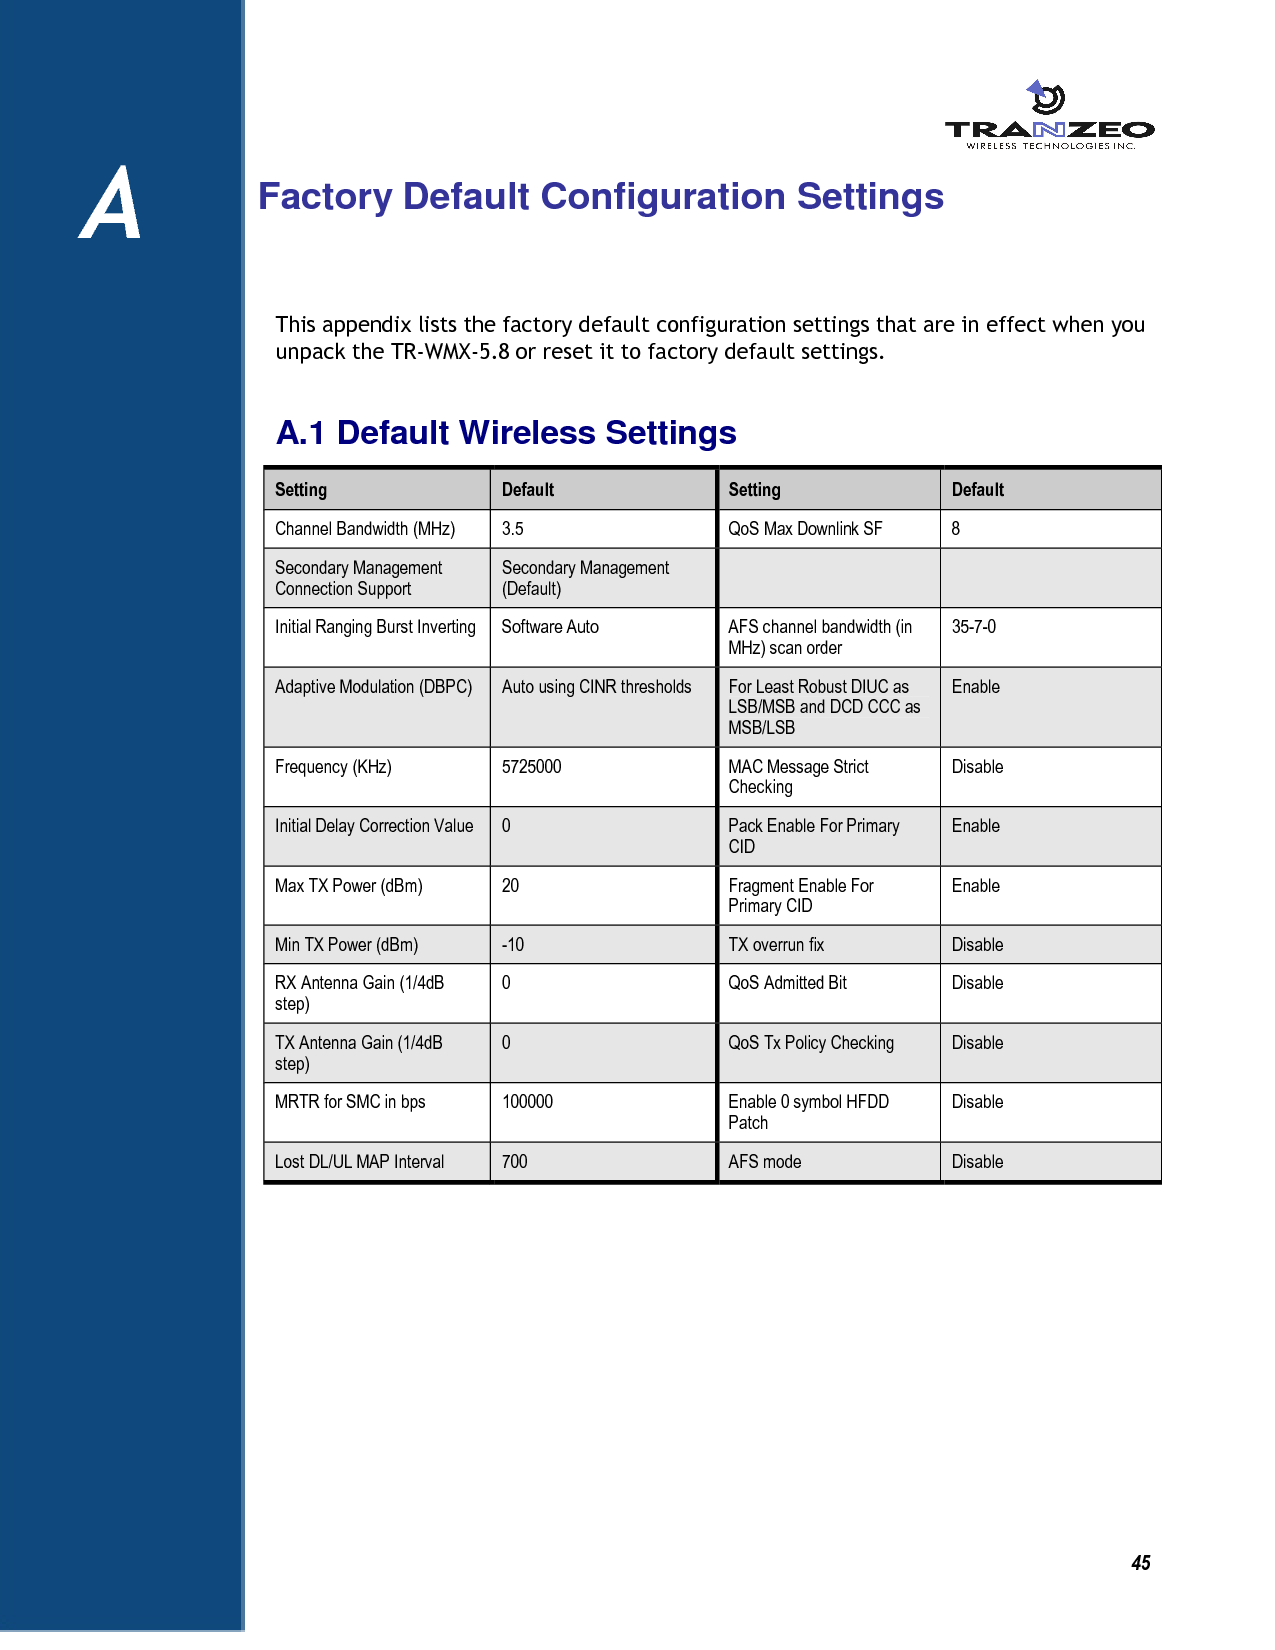          45 A      Factory Default Configuration Settings This appendix lists the factory default configuration settings that are in effect when you unpack the TR-WMX-5.8 or reset it to factory default settings. A.1 Default Wireless Settings Setting  Default  Setting  Default Channel Bandwidth (MHz)  3.5  QoS Max Downlink SF  8 Secondary Management Connection Support Secondary Management (Default)    Initial Ranging Burst Inverting  Software Auto  AFS channel bandwidth (in MHz) scan order 35-7-0 Adaptive Modulation (DBPC)  Auto using CINR thresholds  For Least Robust DIUC as LSB/MSB and DCD CCC as MSB/LSB Enable Frequency (KHz)  5725000  MAC Message Strict Checking Disable Initial Delay Correction Value  0  Pack Enable For Primary CID Enable Max TX Power (dBm)  20  Fragment Enable For Primary CID Enable Min TX Power (dBm)  -10  TX overrun fix  Disable RX Antenna Gain (1/4dB step) 0  QoS Admitted Bit  Disable TX Antenna Gain (1/4dB step) 0  QoS Tx Policy Checking  Disable MRTR for SMC in bps  100000  Enable 0 symbol HFDD Patch Disable Lost DL/UL MAP Interval  700  AFS mode  Disable   A 